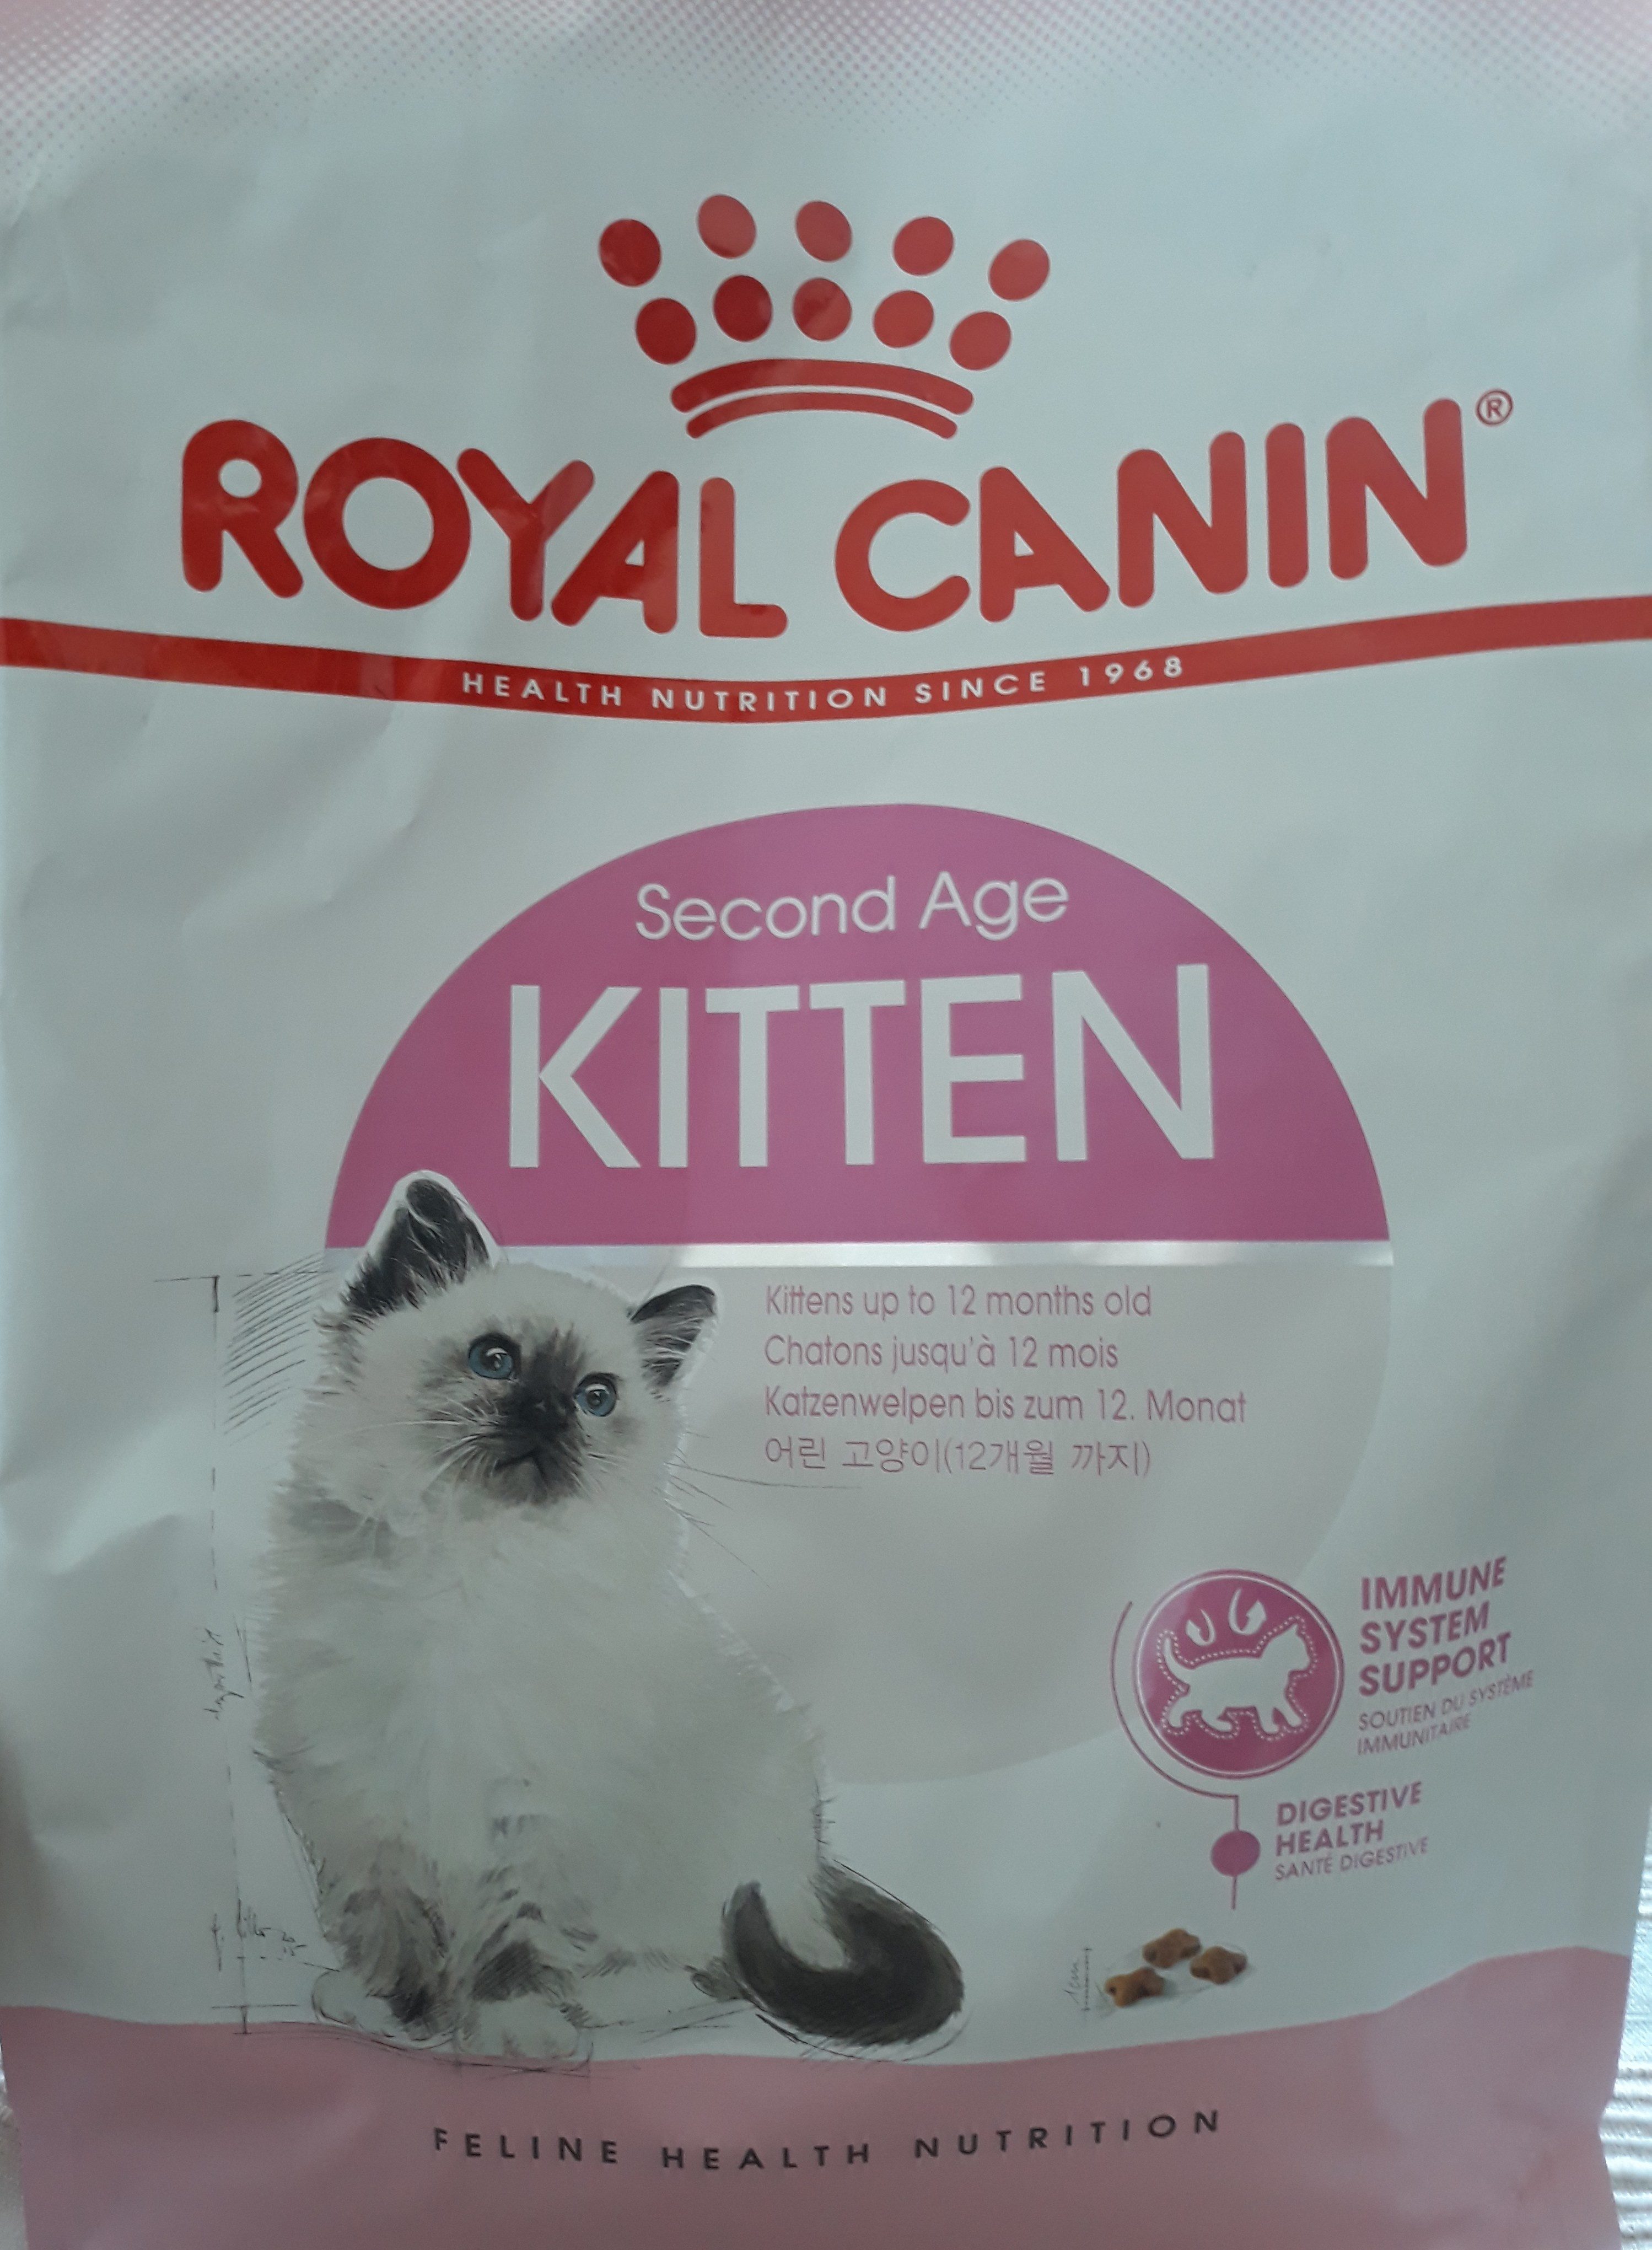 ROYAL CANIN KITTEN dry food for kittens up to one year of age, 2 kg - Produit - fr